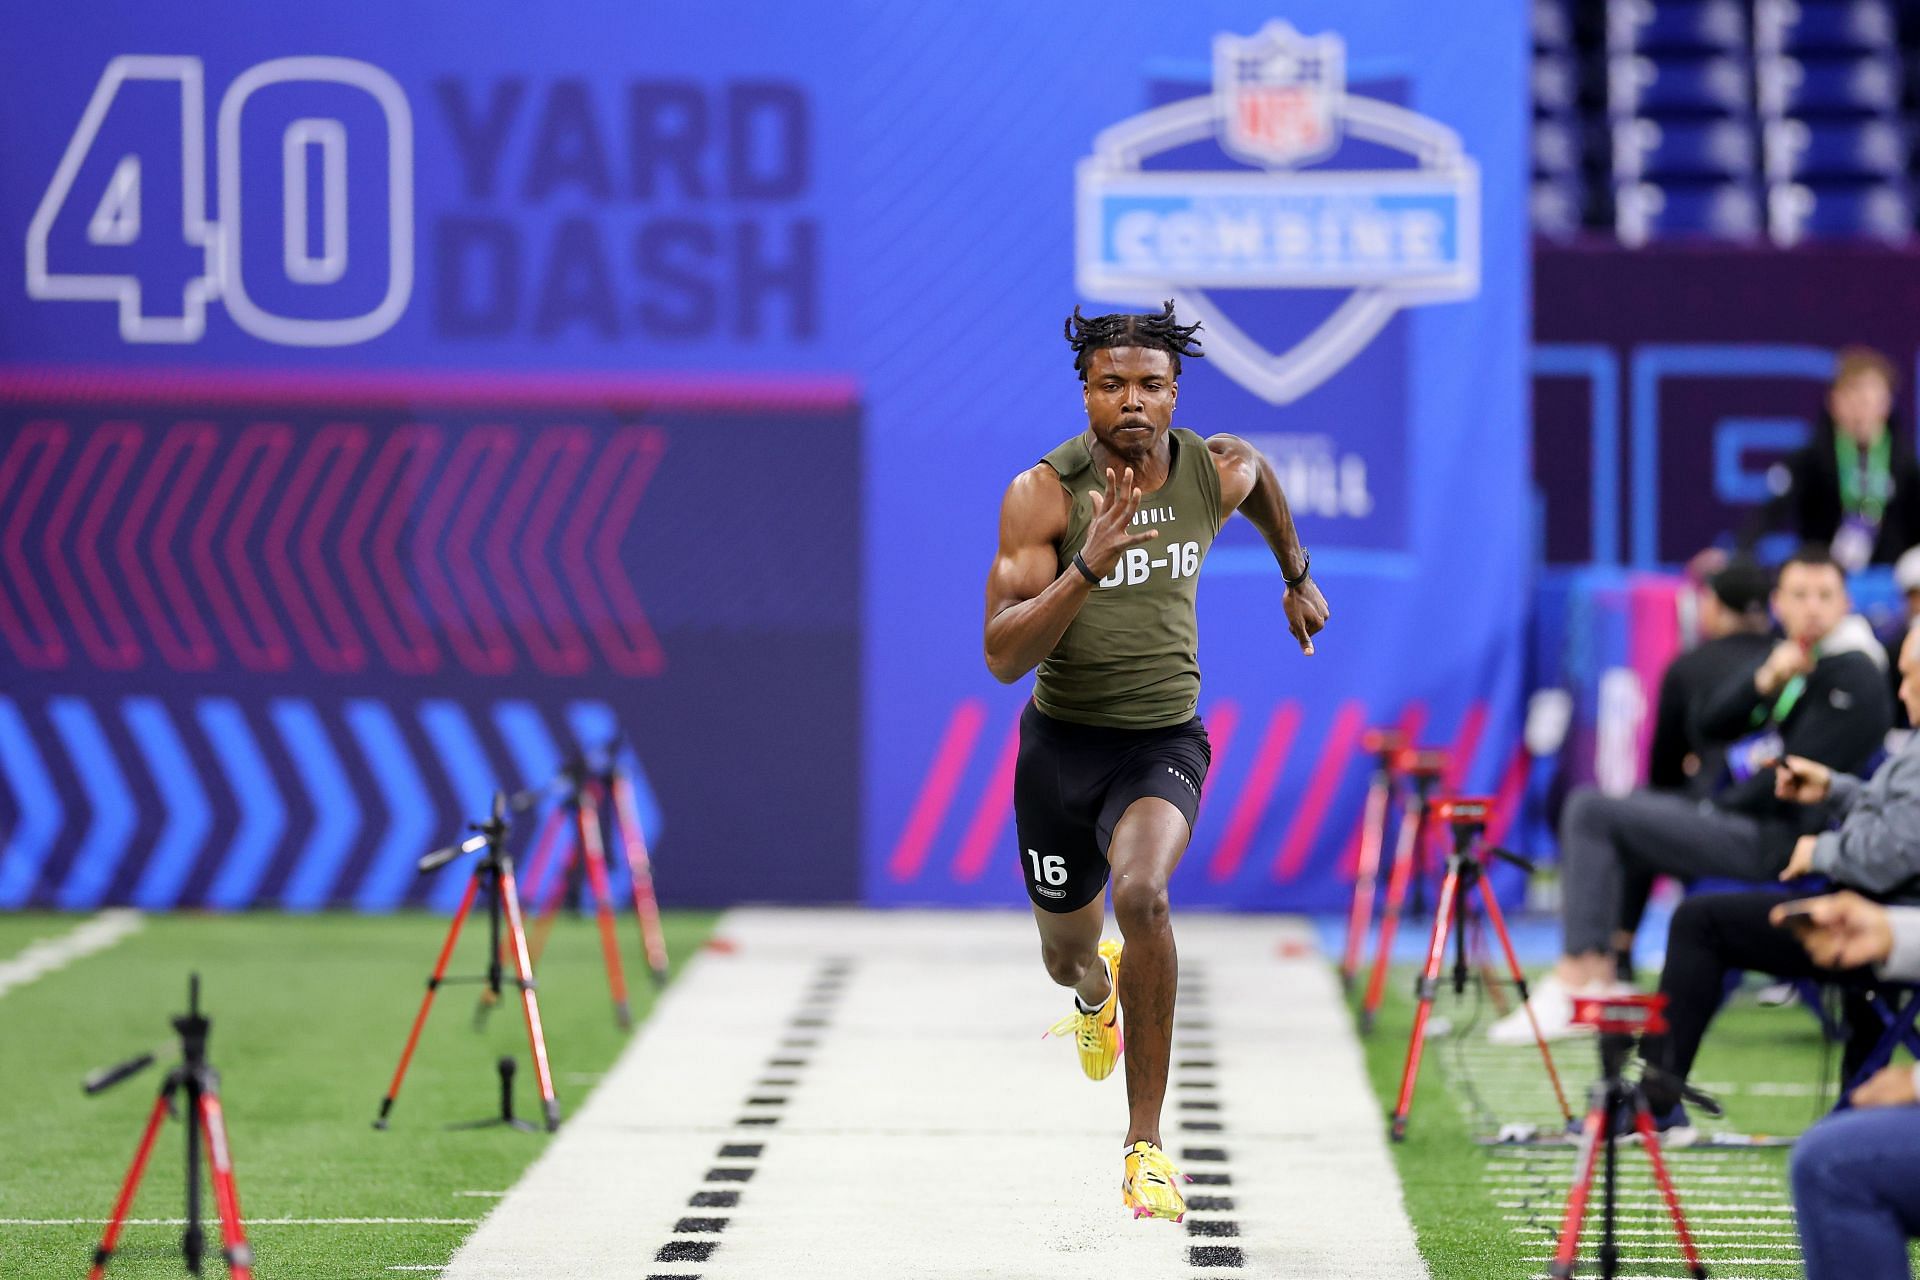 Khyree Jackson #DB16 of Oregon participates in the 40-yard dash during the NFL Combine